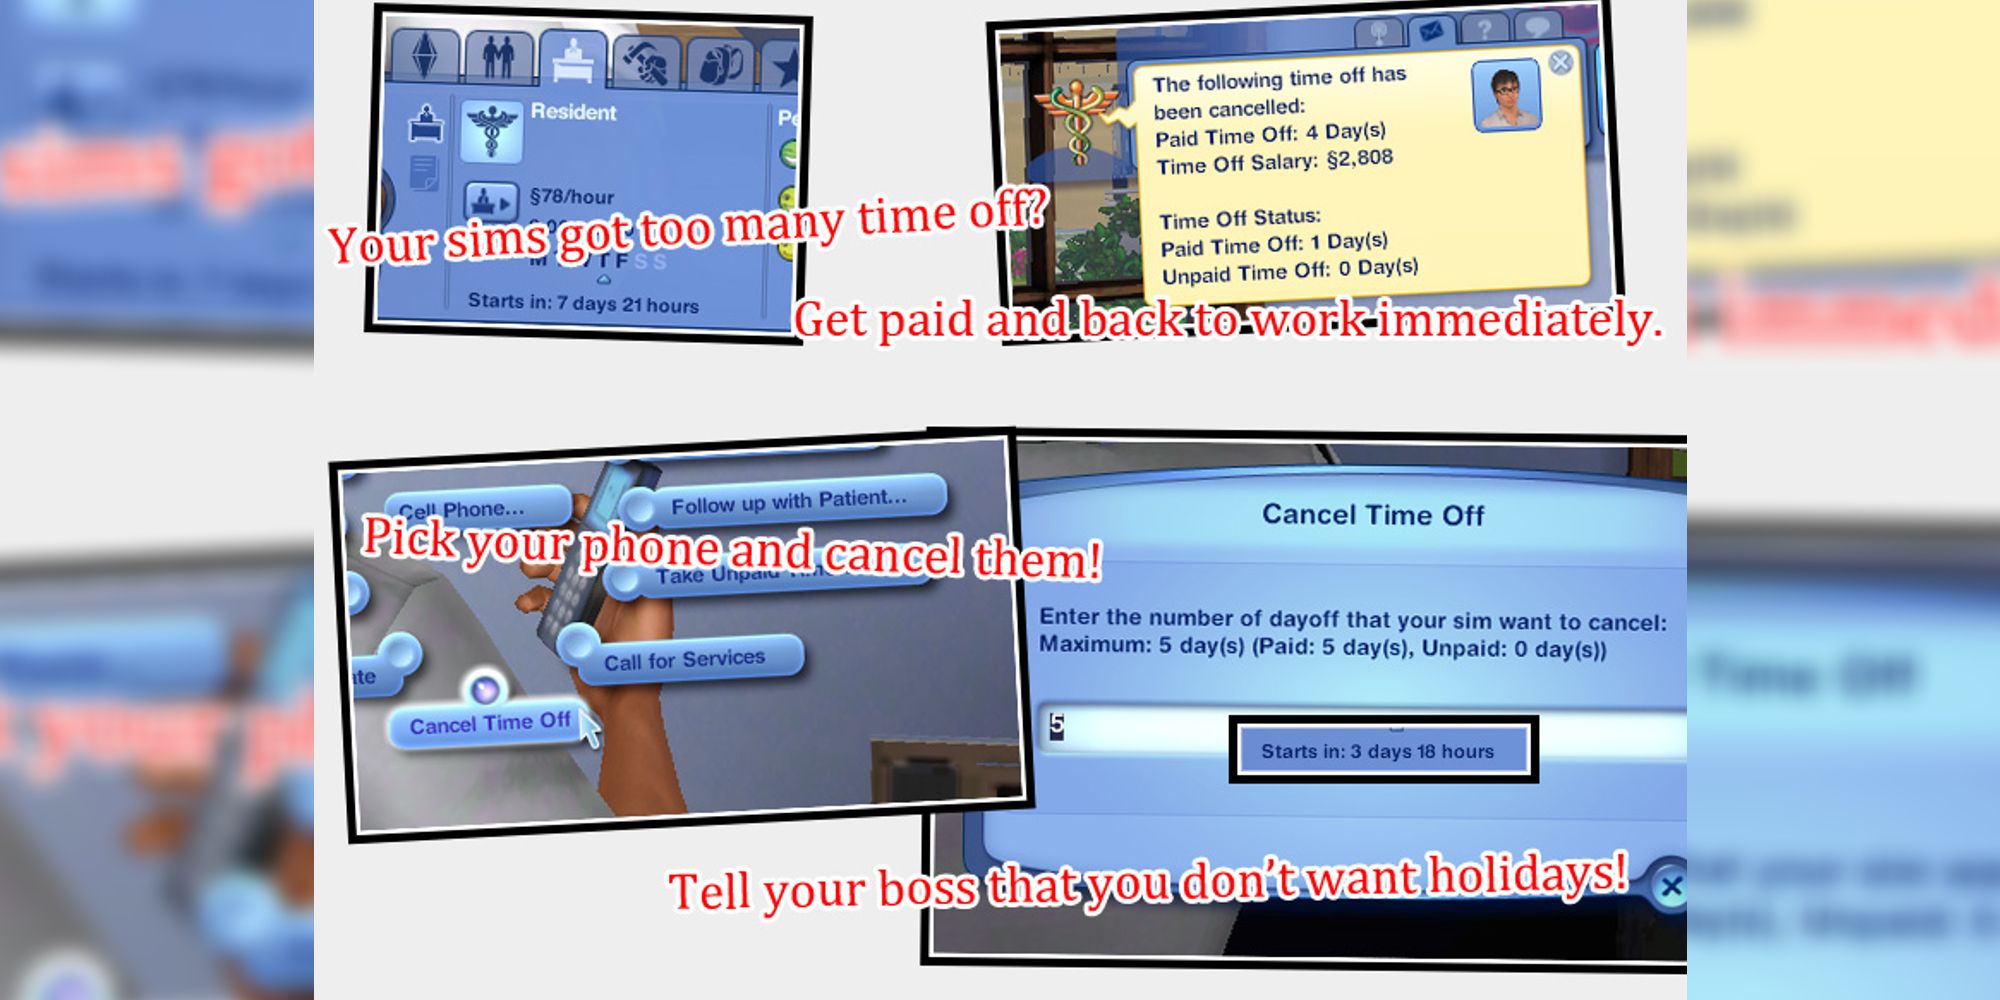 cancel time off promotional mod image showing what the mod does